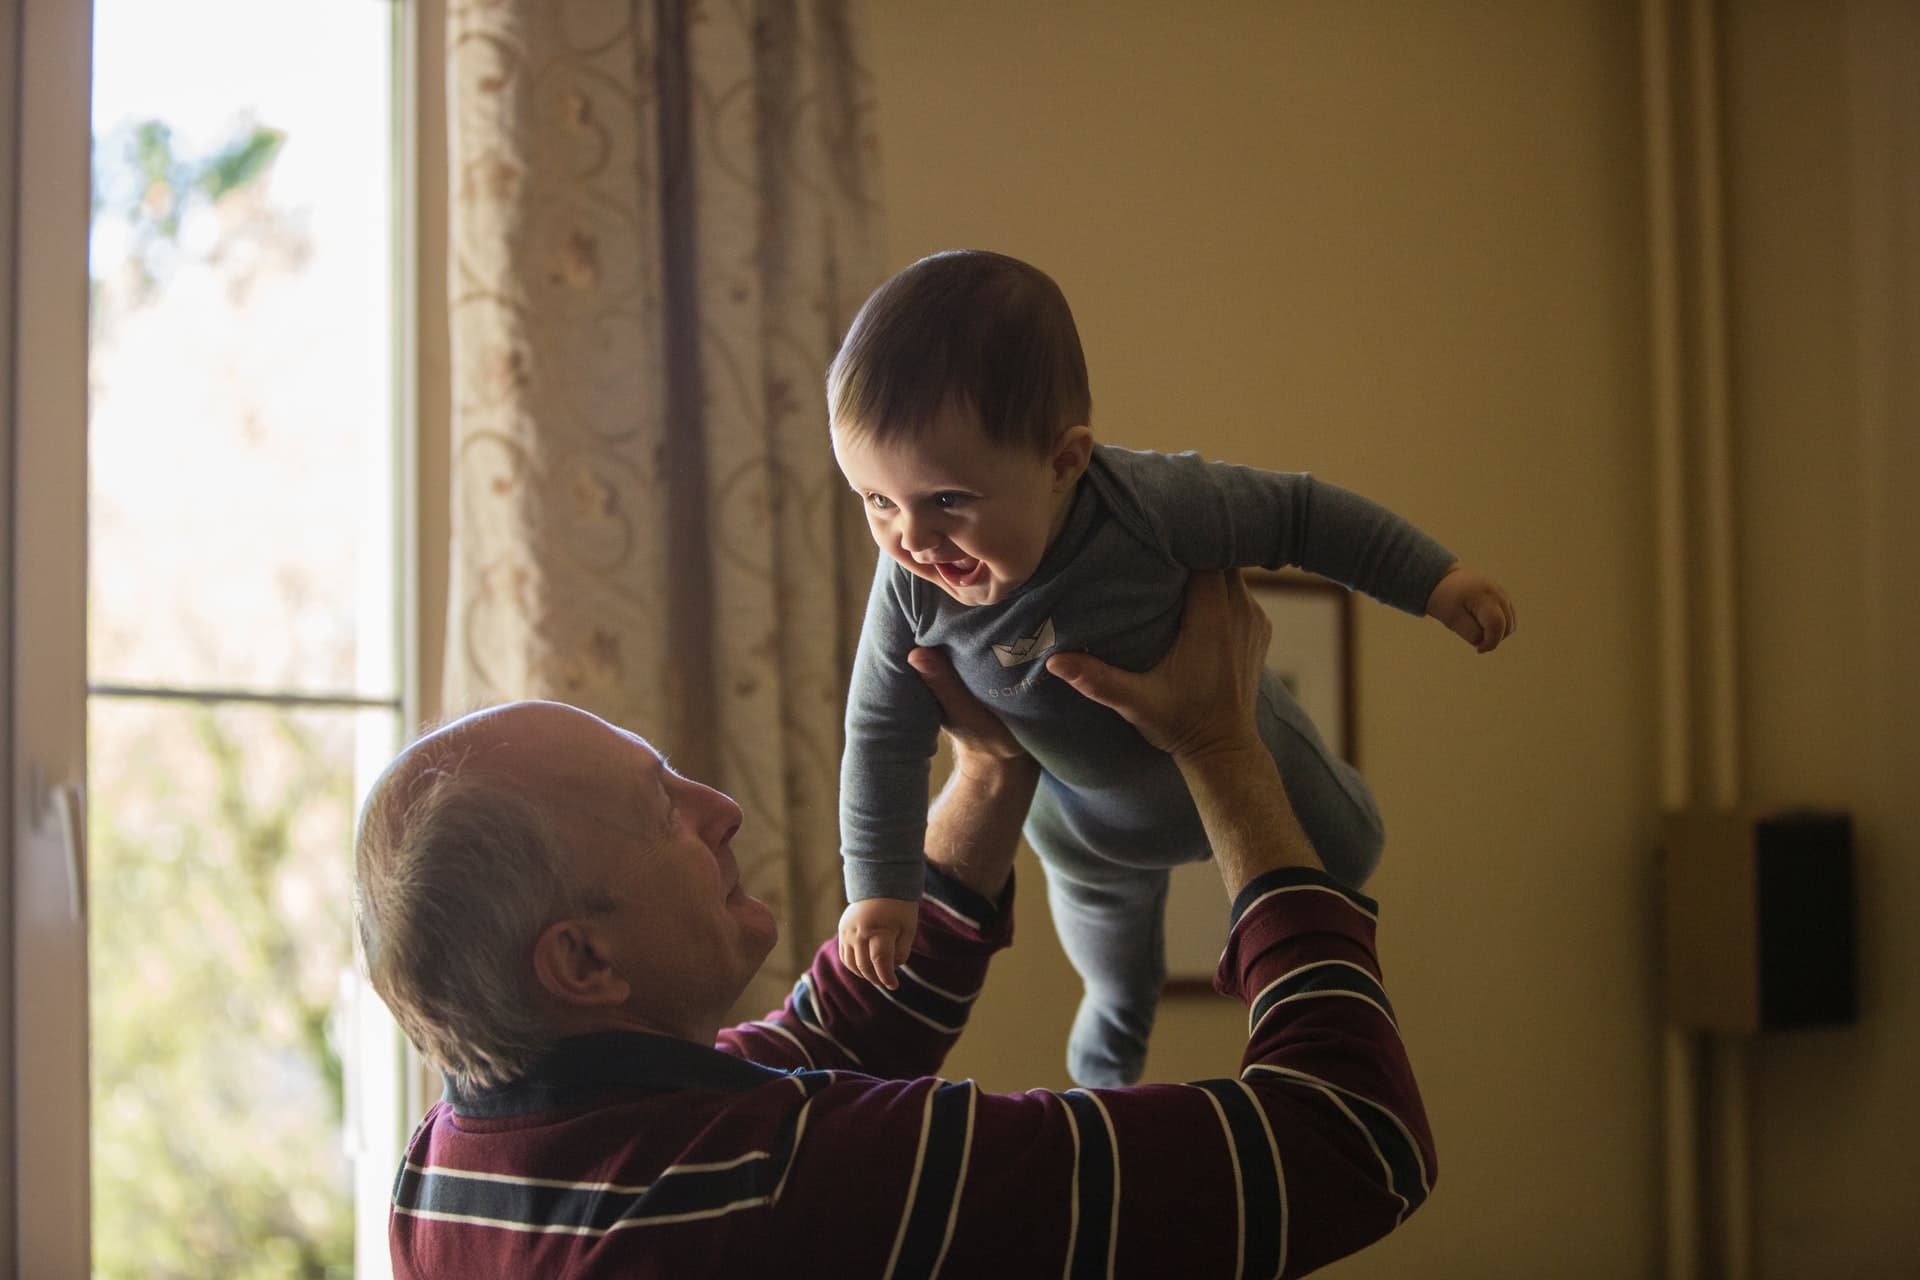 Age of Grandchild May Impact a Grandparent’s Request for Contact